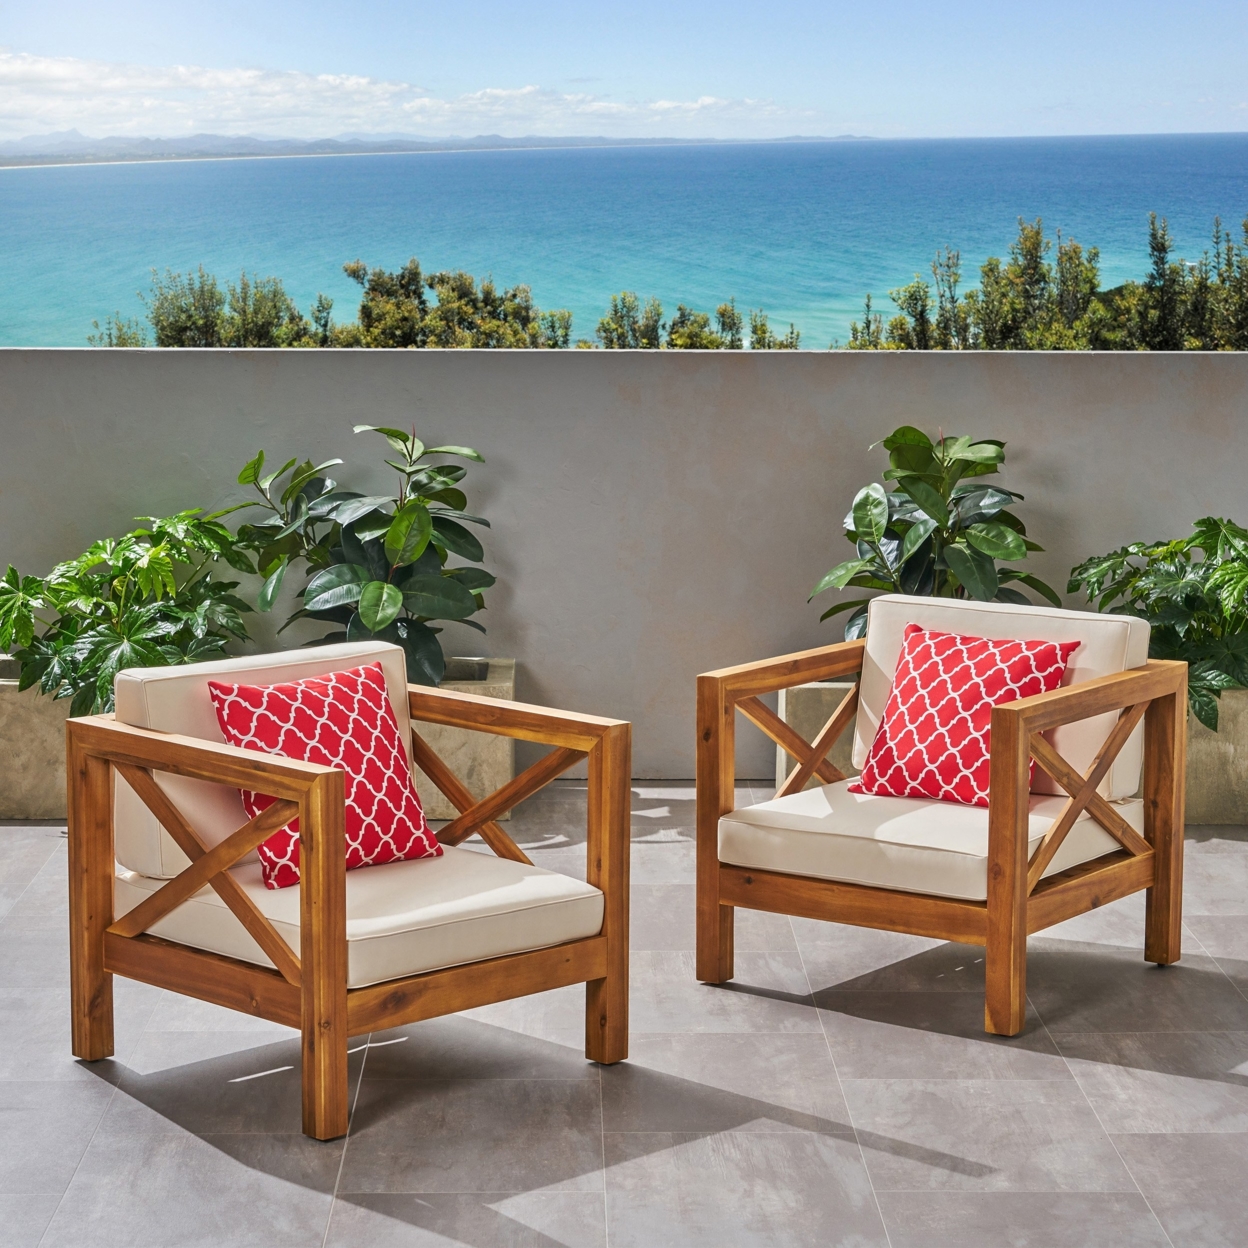 Indira Outdoor Acacia Wood Club Chairs With Cushions (Set Of 2) - Teak + Beige